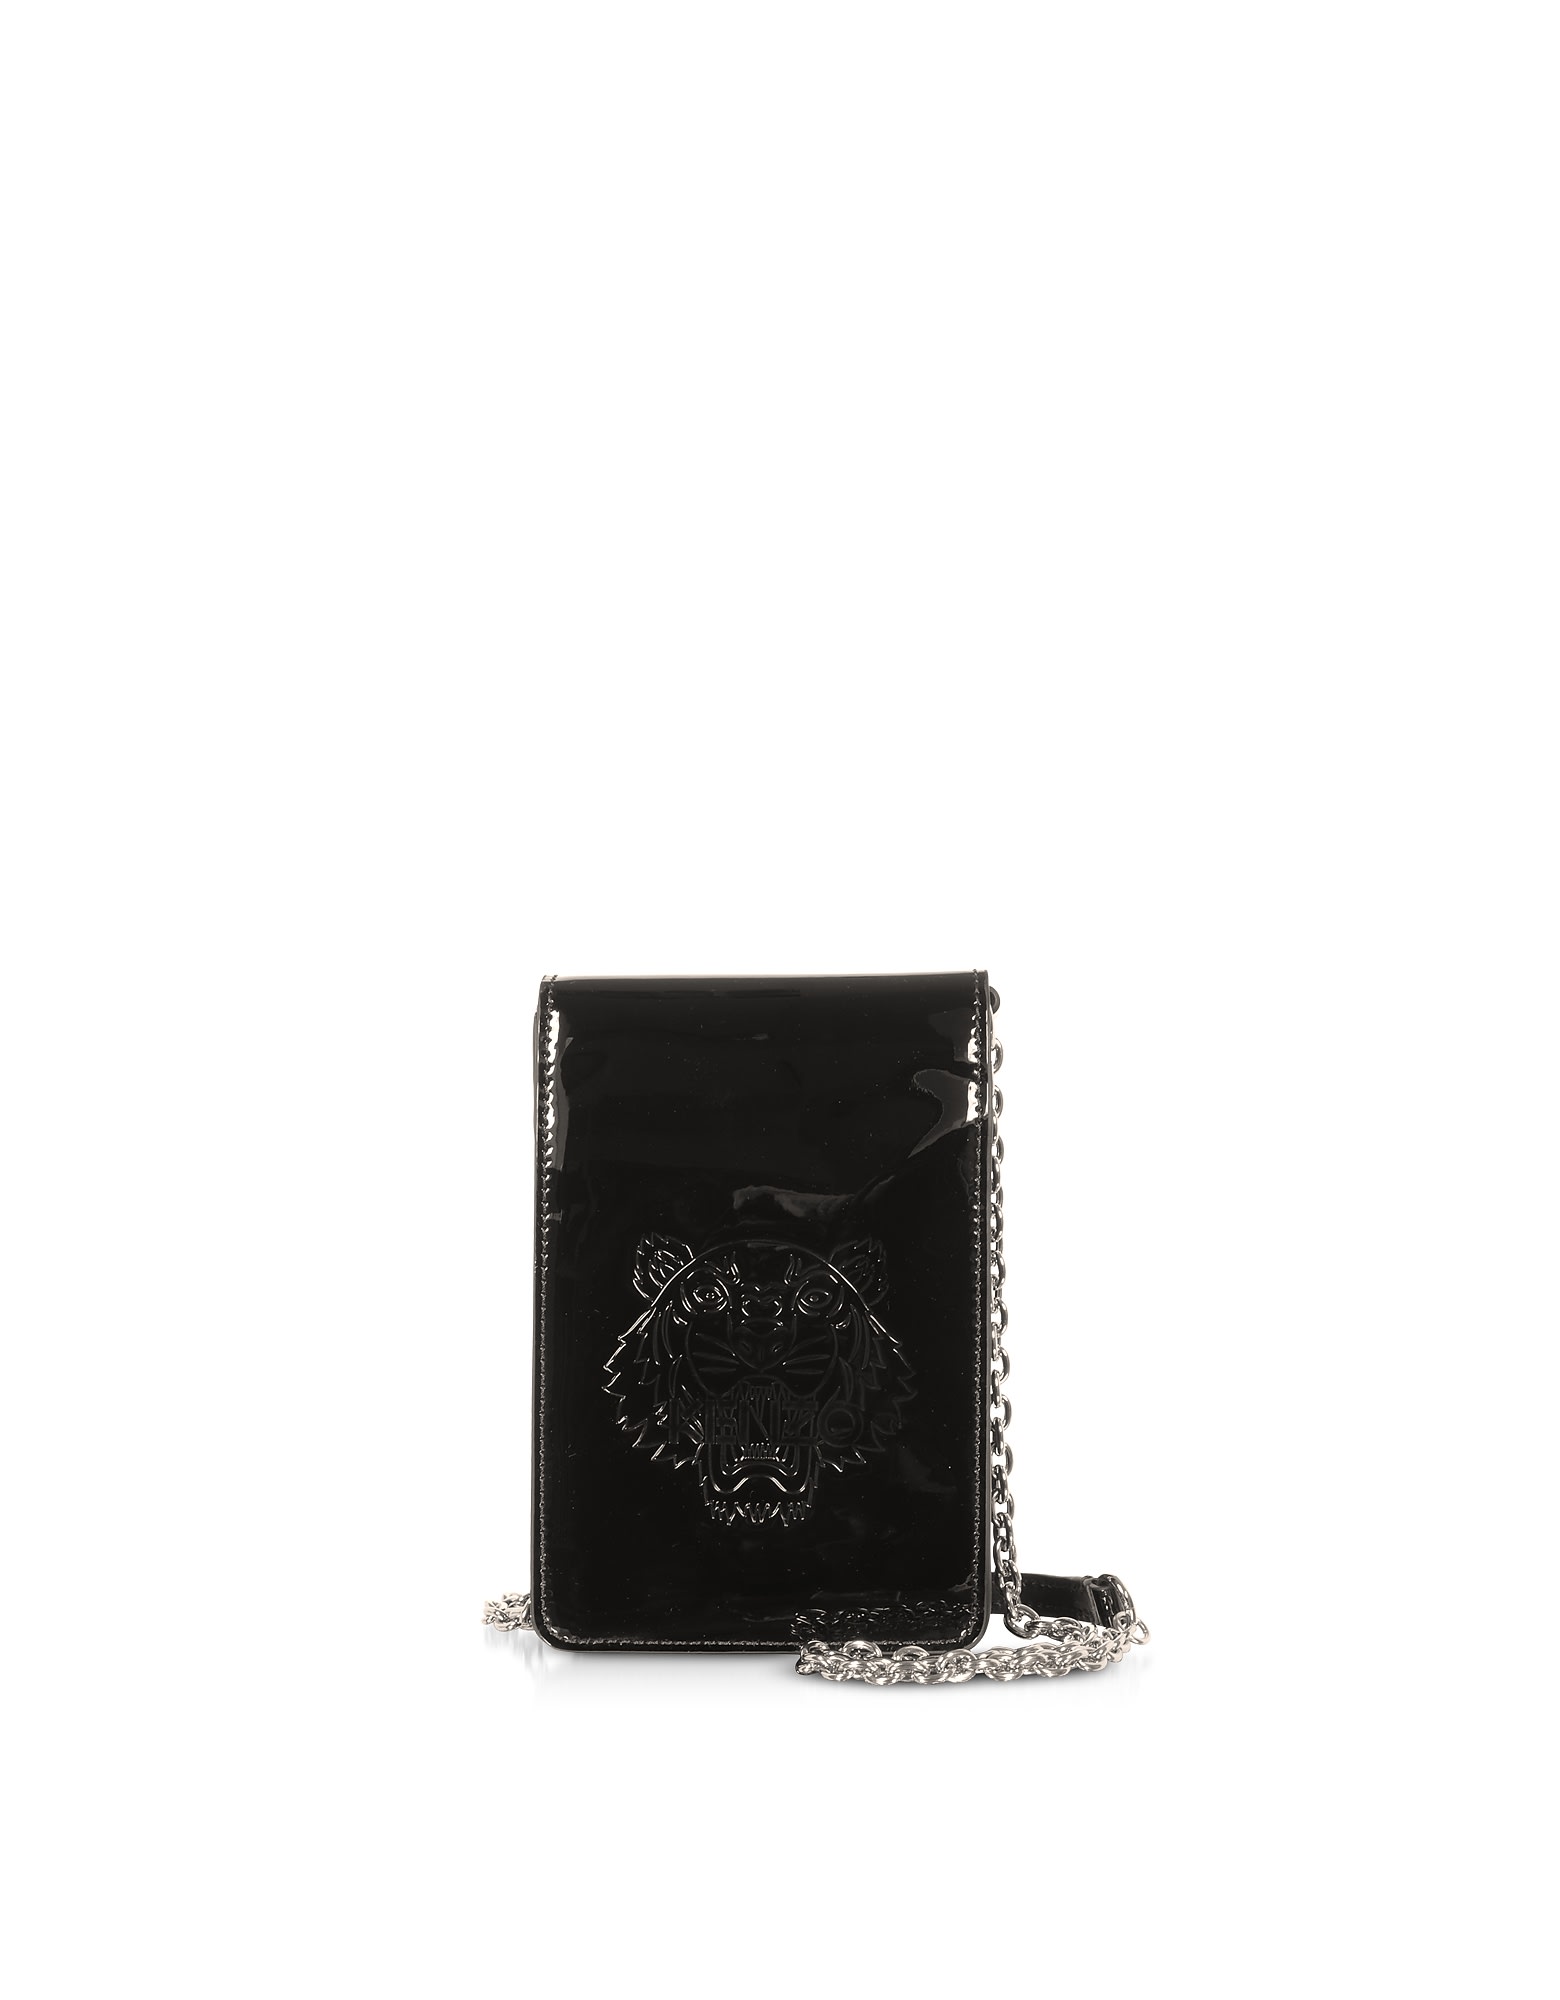 KENZO BLACK PREPPY TIGER EMBOSSED PHONE ON A CHAIN,11217365